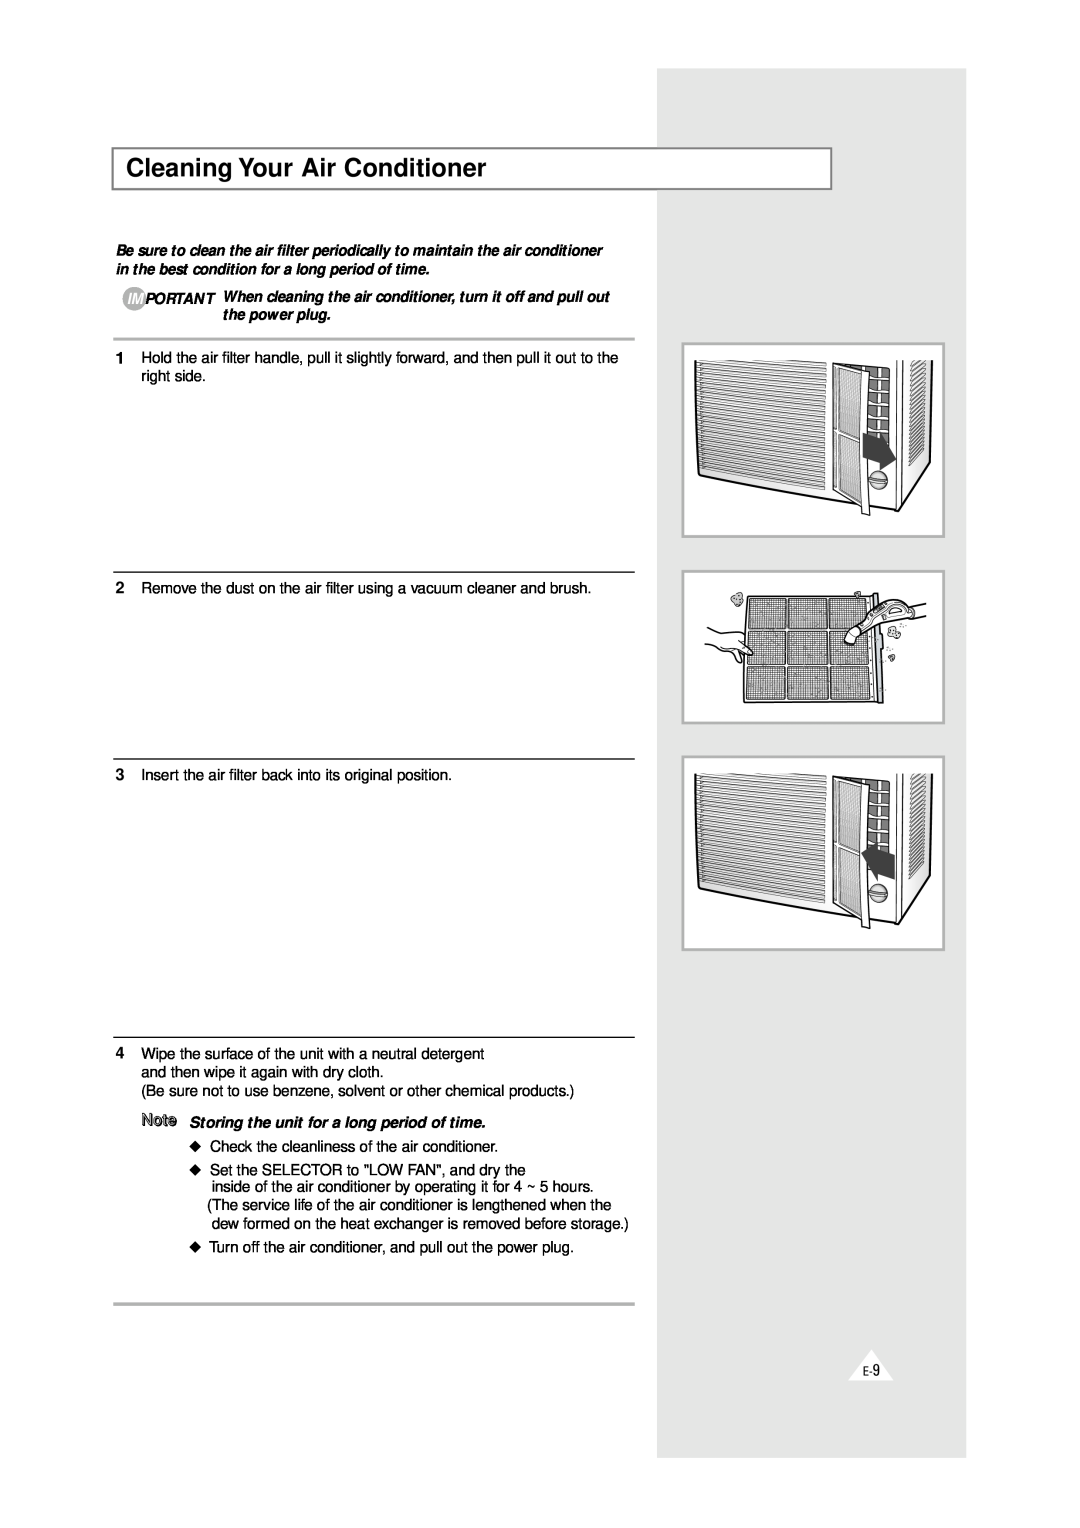 Samsung AW0500 AW0500A manual Cleaning Your Air Conditioner, Note Storing the unit for a long period of time 